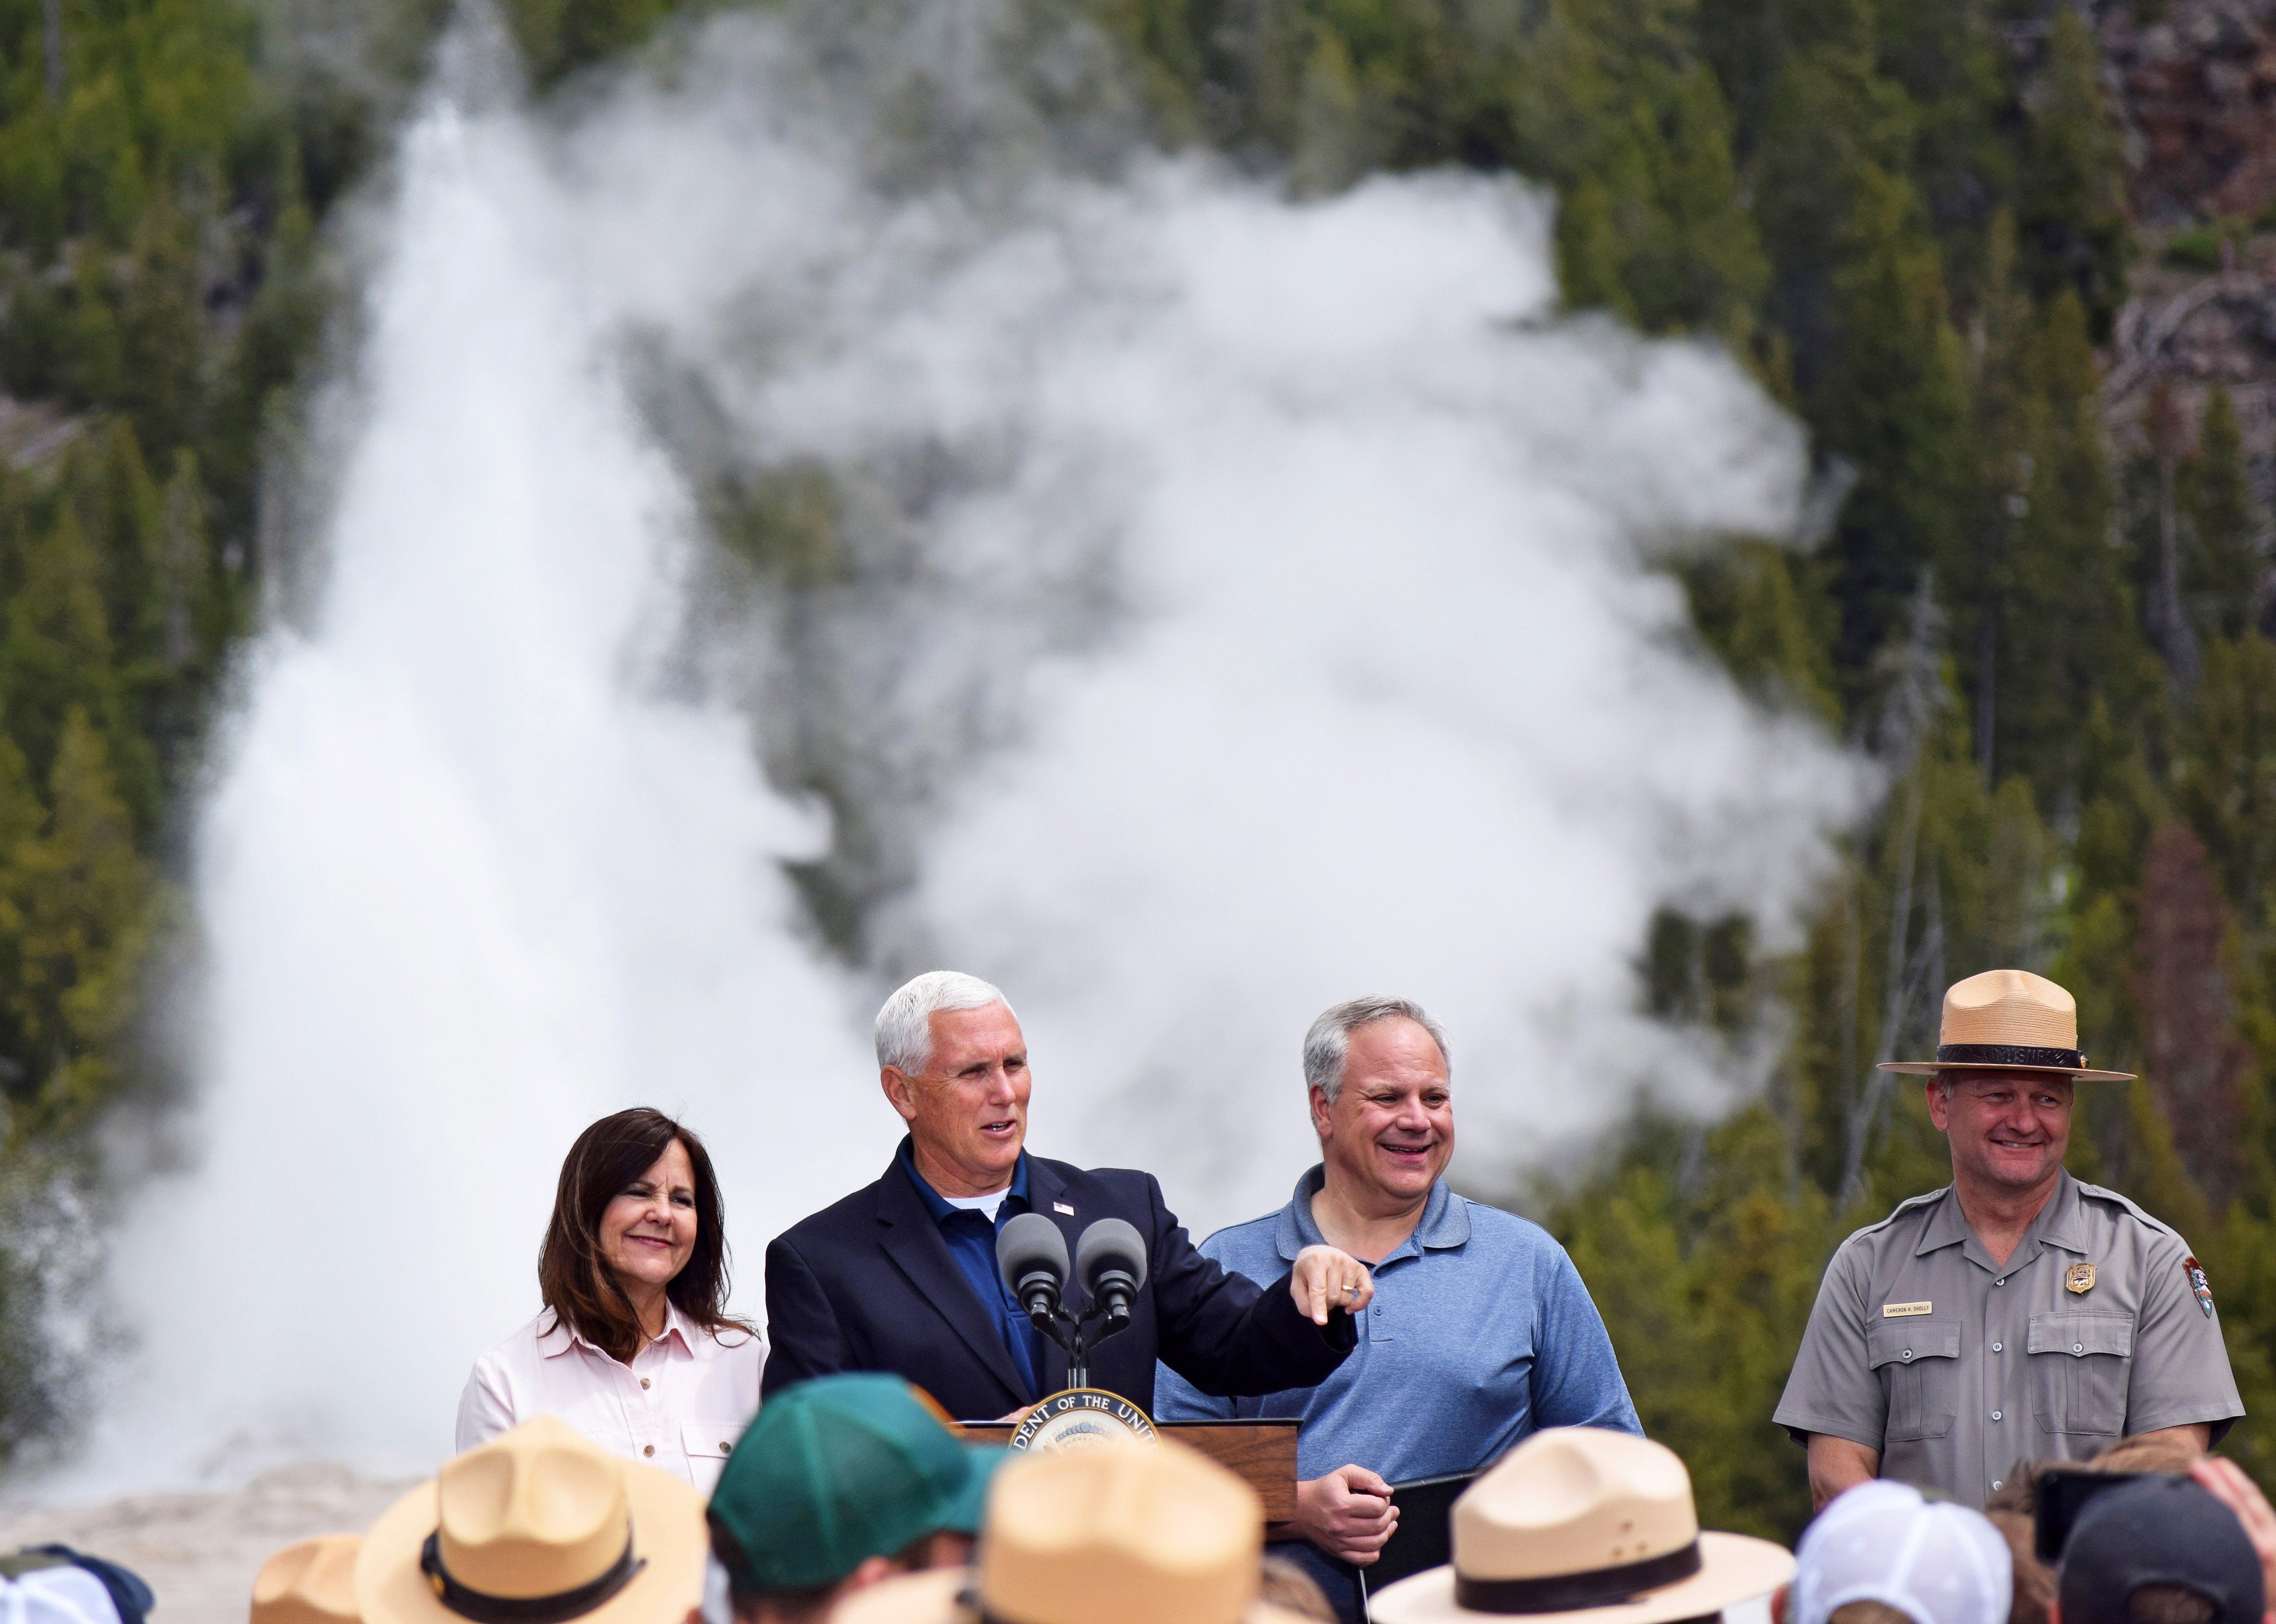 U.S. Vice President Mike Pence, flanked by wife Karen, Interior Secretary David Bernhardt and Yellowstone National Park Superintendent Cam Sholly, speaks in front of Old Faithful Geyser in Yellowstone National Park